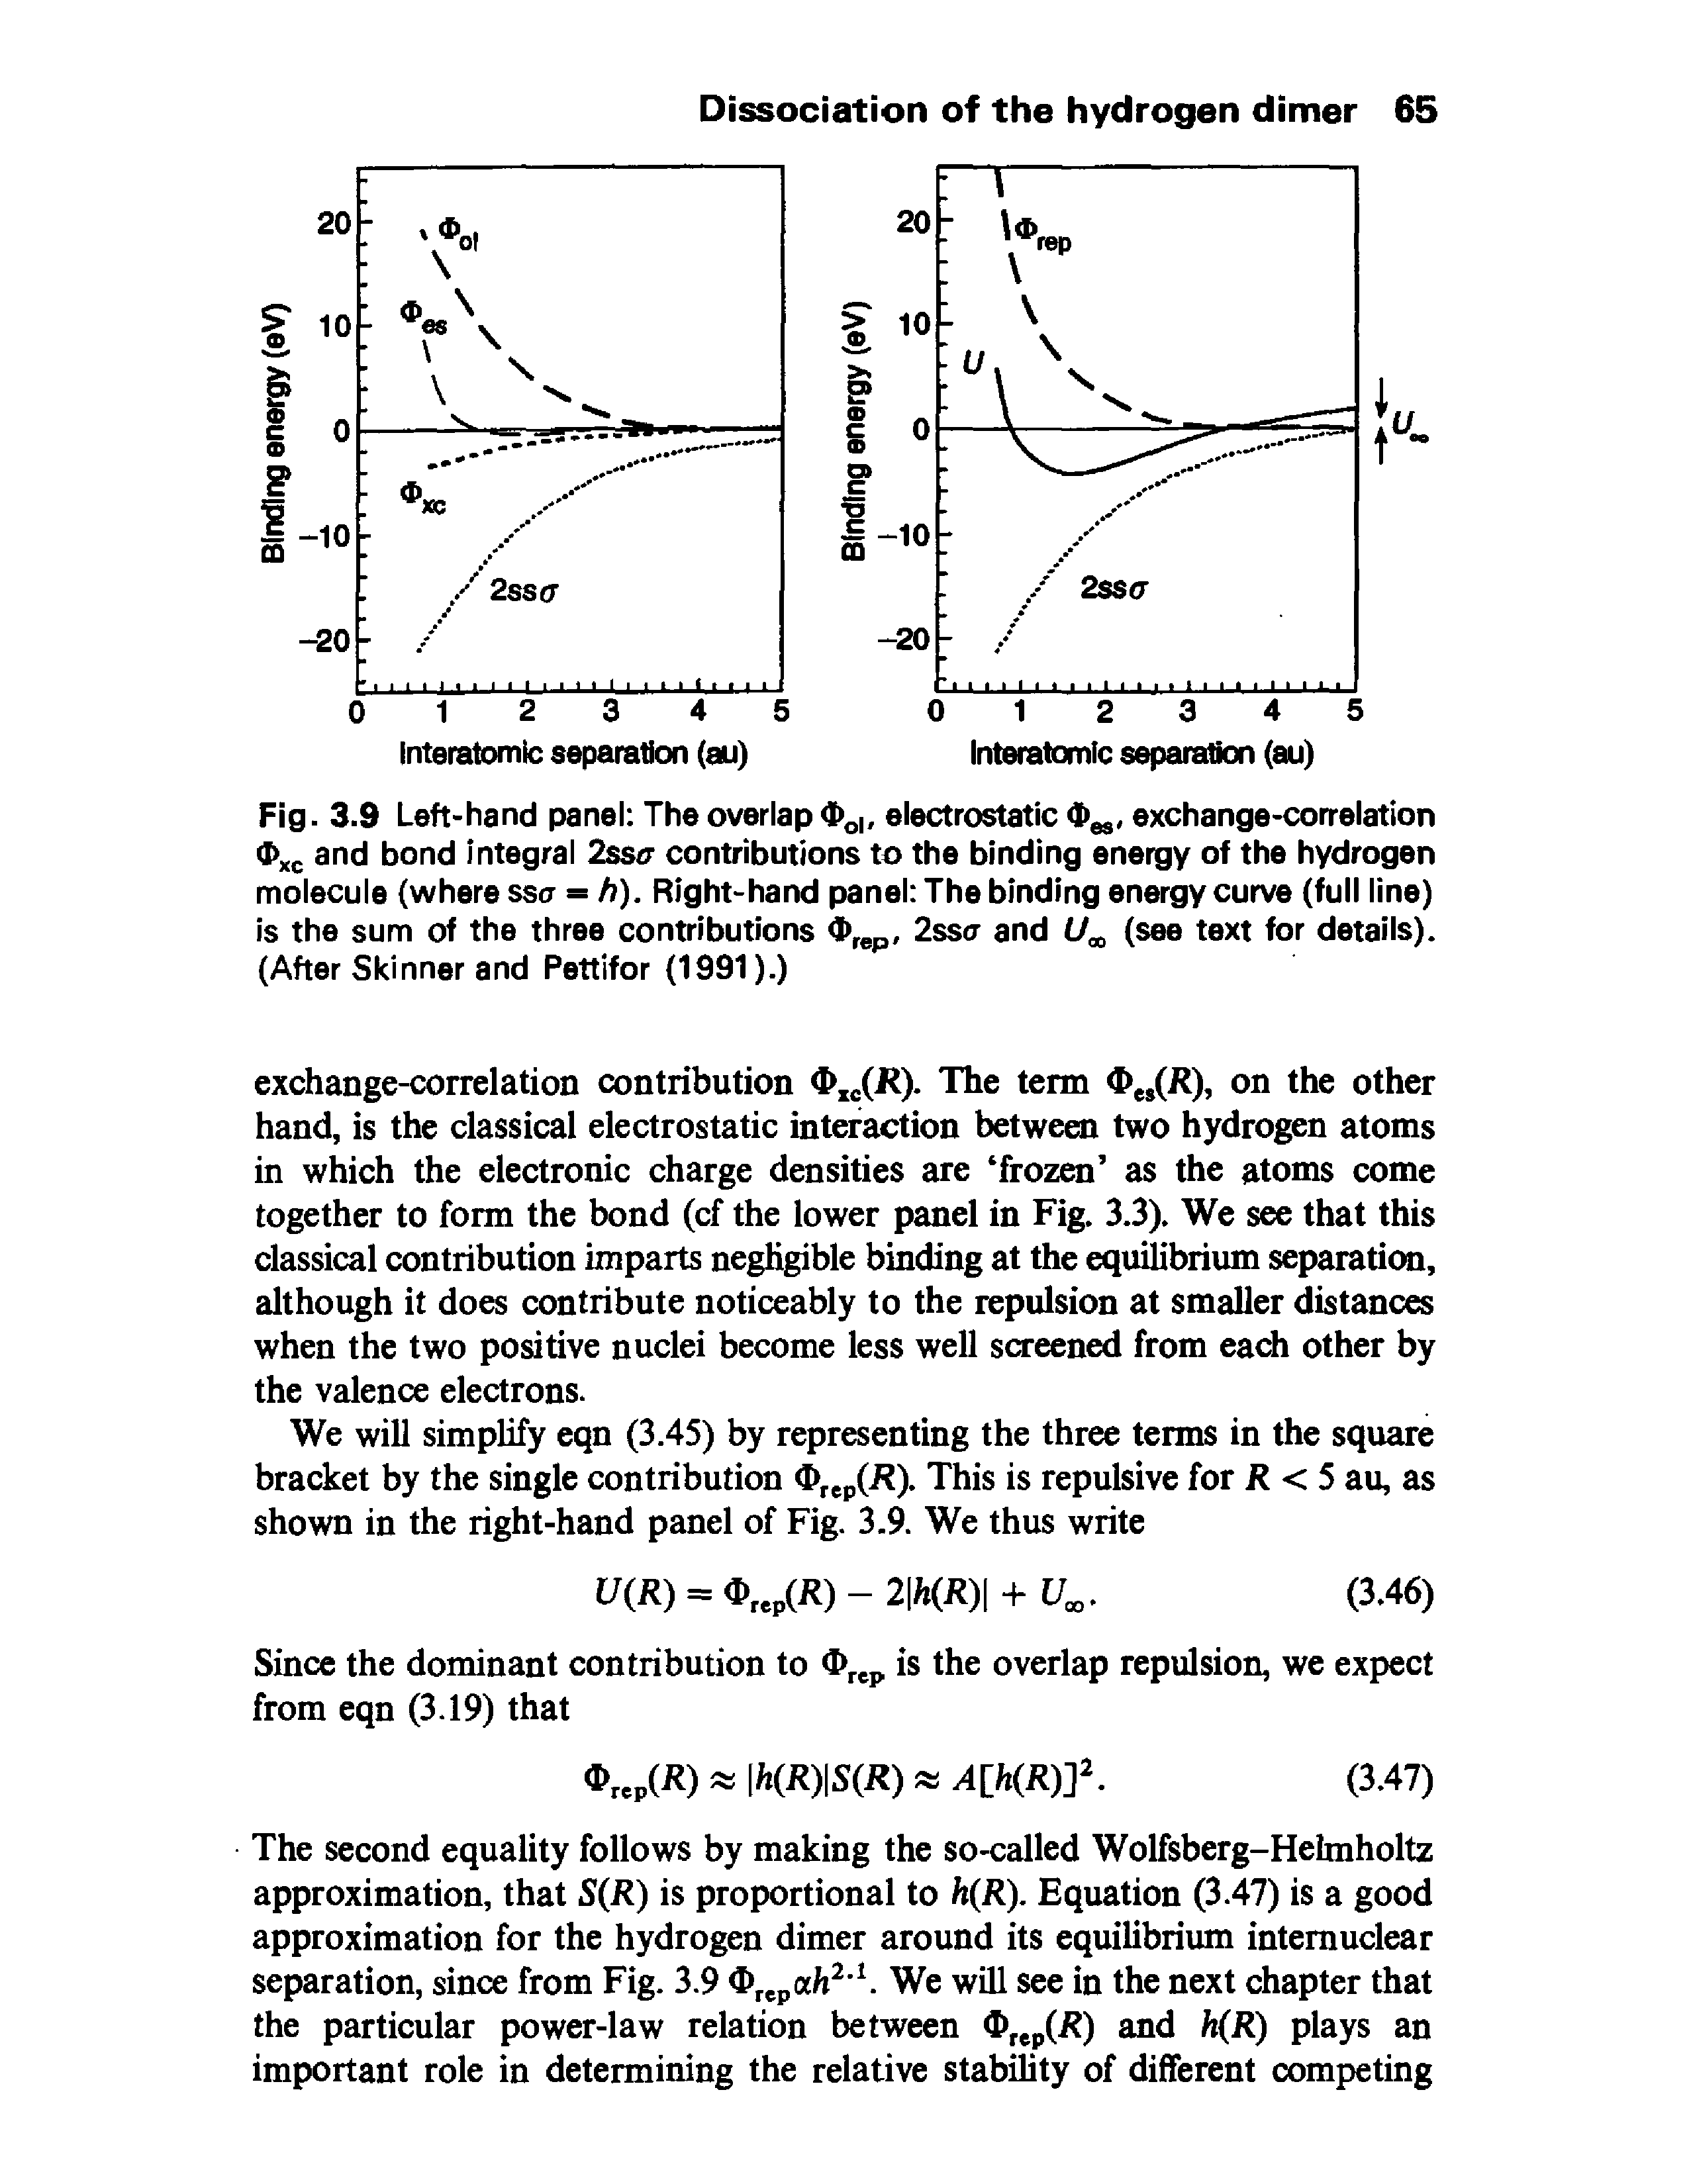 Fig. 3.9 Left-hand panel The overlap / electrostatic , exchange-correlation and bond integral 2ssa contributions to the binding energy of the hydrogen molecule (where ssa = h). Right-hand panel The binding energy curve (full line) is the sum of the three contributions , 2ssa and (see text for details). (After Skinner and Pettifor (1991).)...